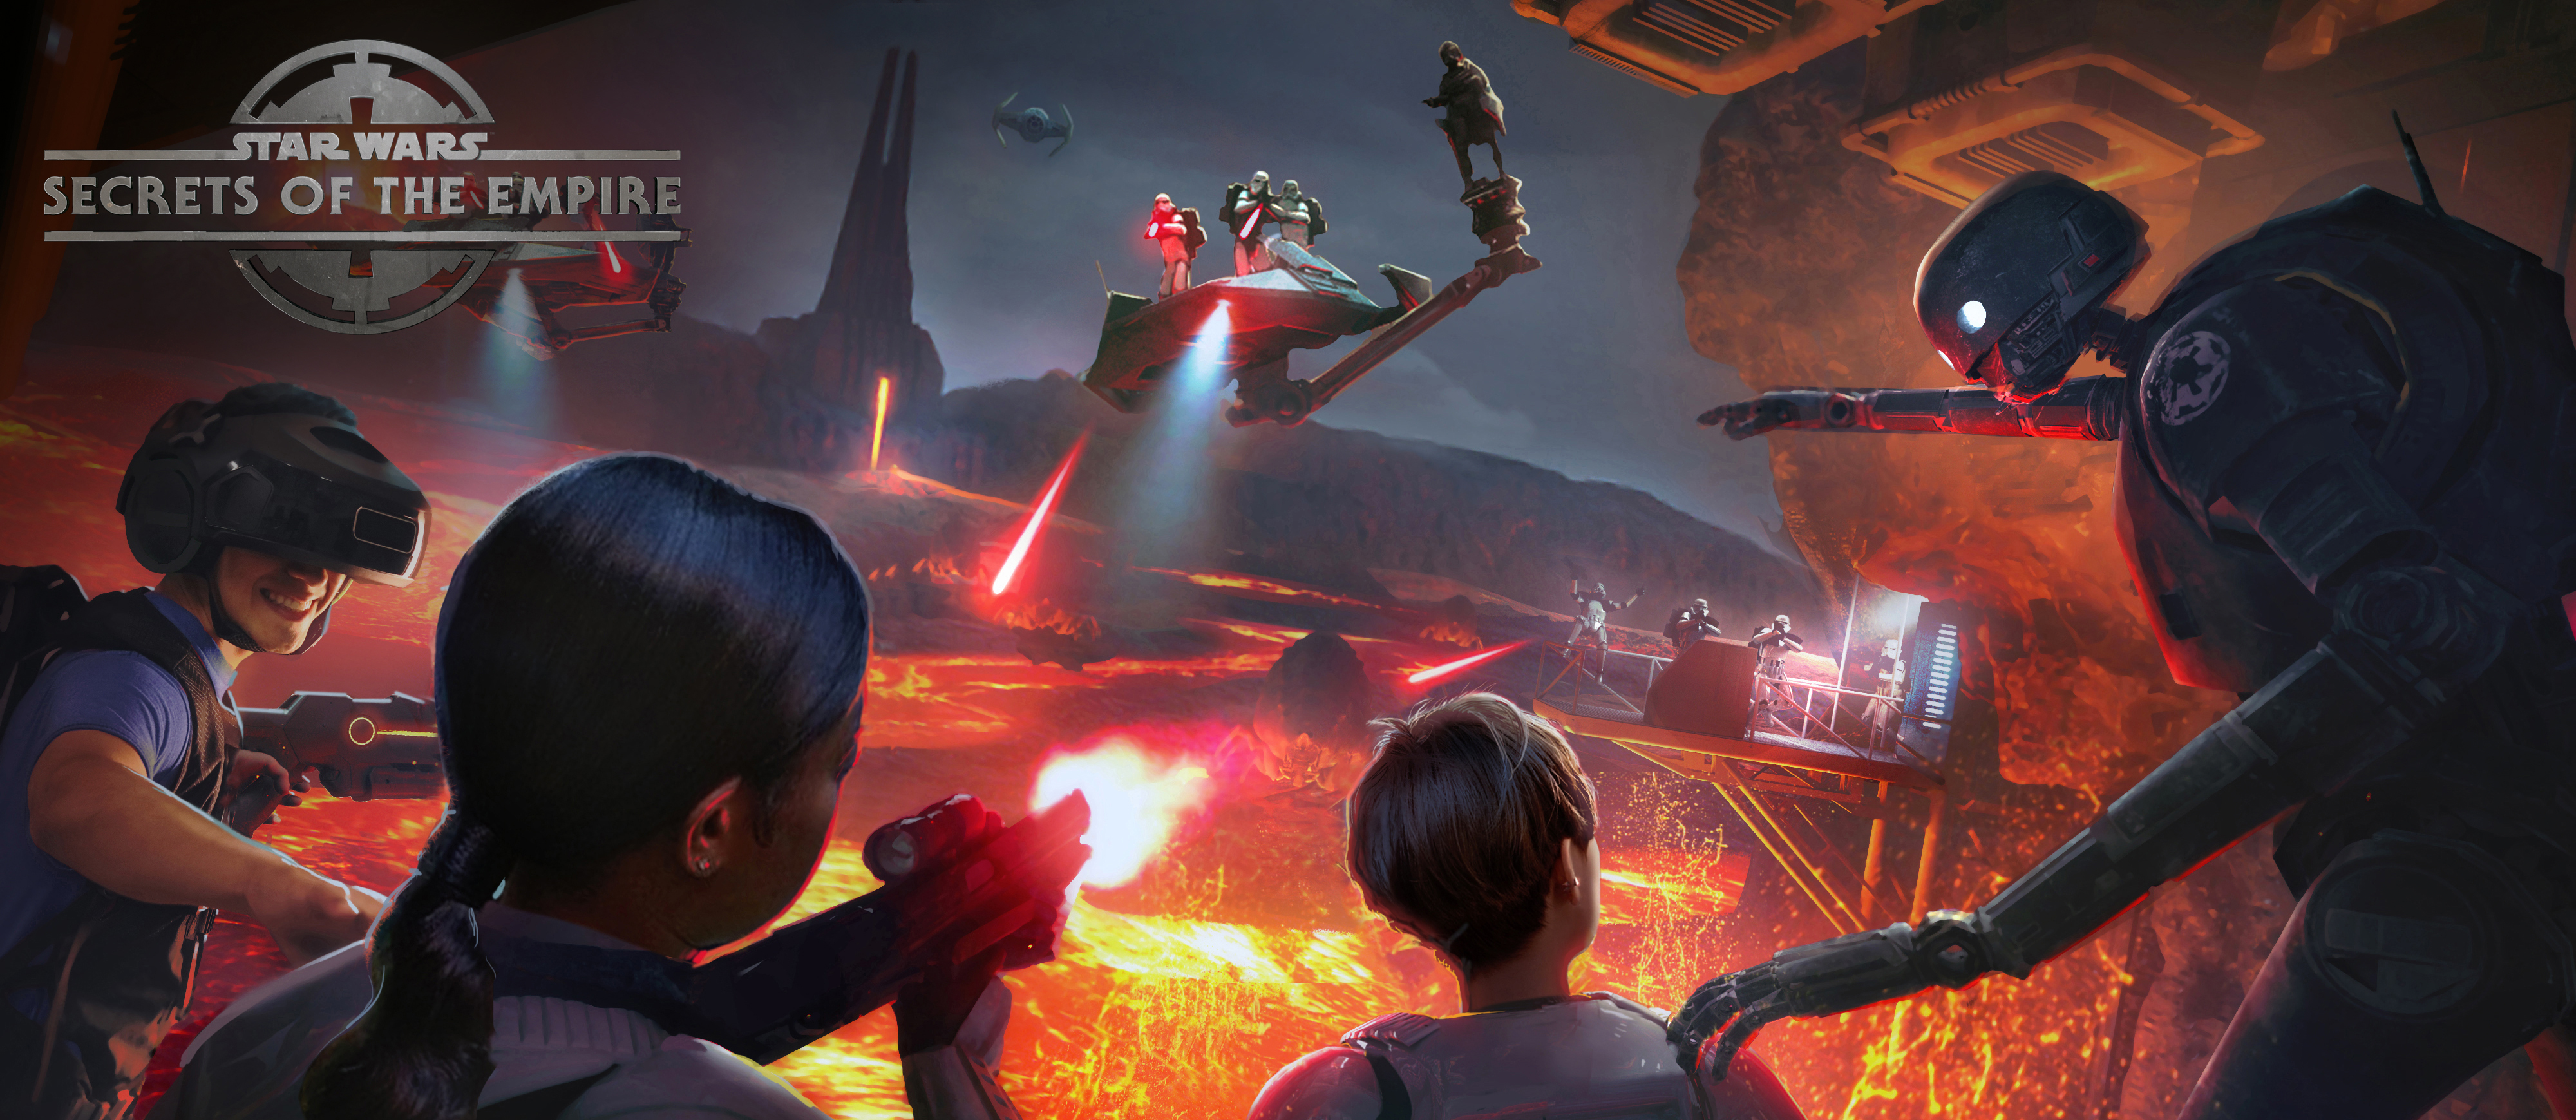 Lucasfilm, ILMxLAB and The VOID Announce New Hyper-Reality Experience, Star Wars: Secrets of the Empire